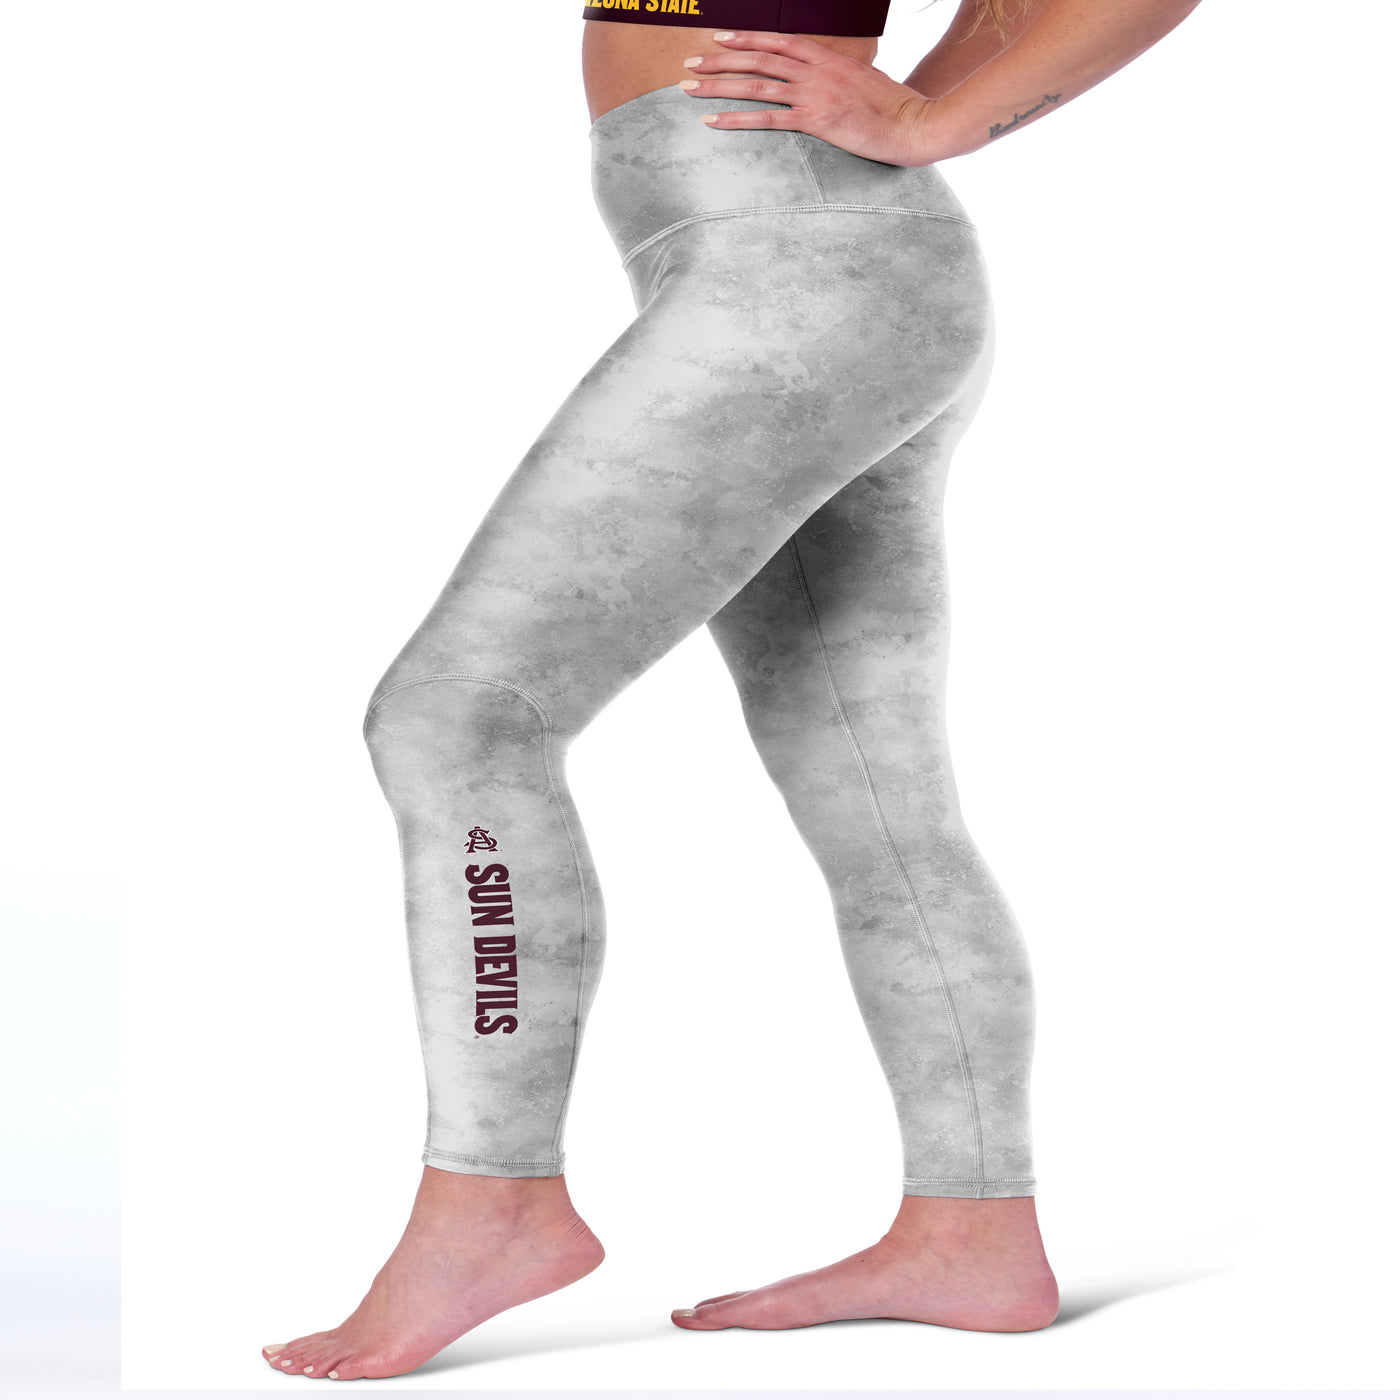 ASU gray tie dye leggings with and interlock 'A' and 'S' symbol above 'Sun Devils' letterin gon the left calf